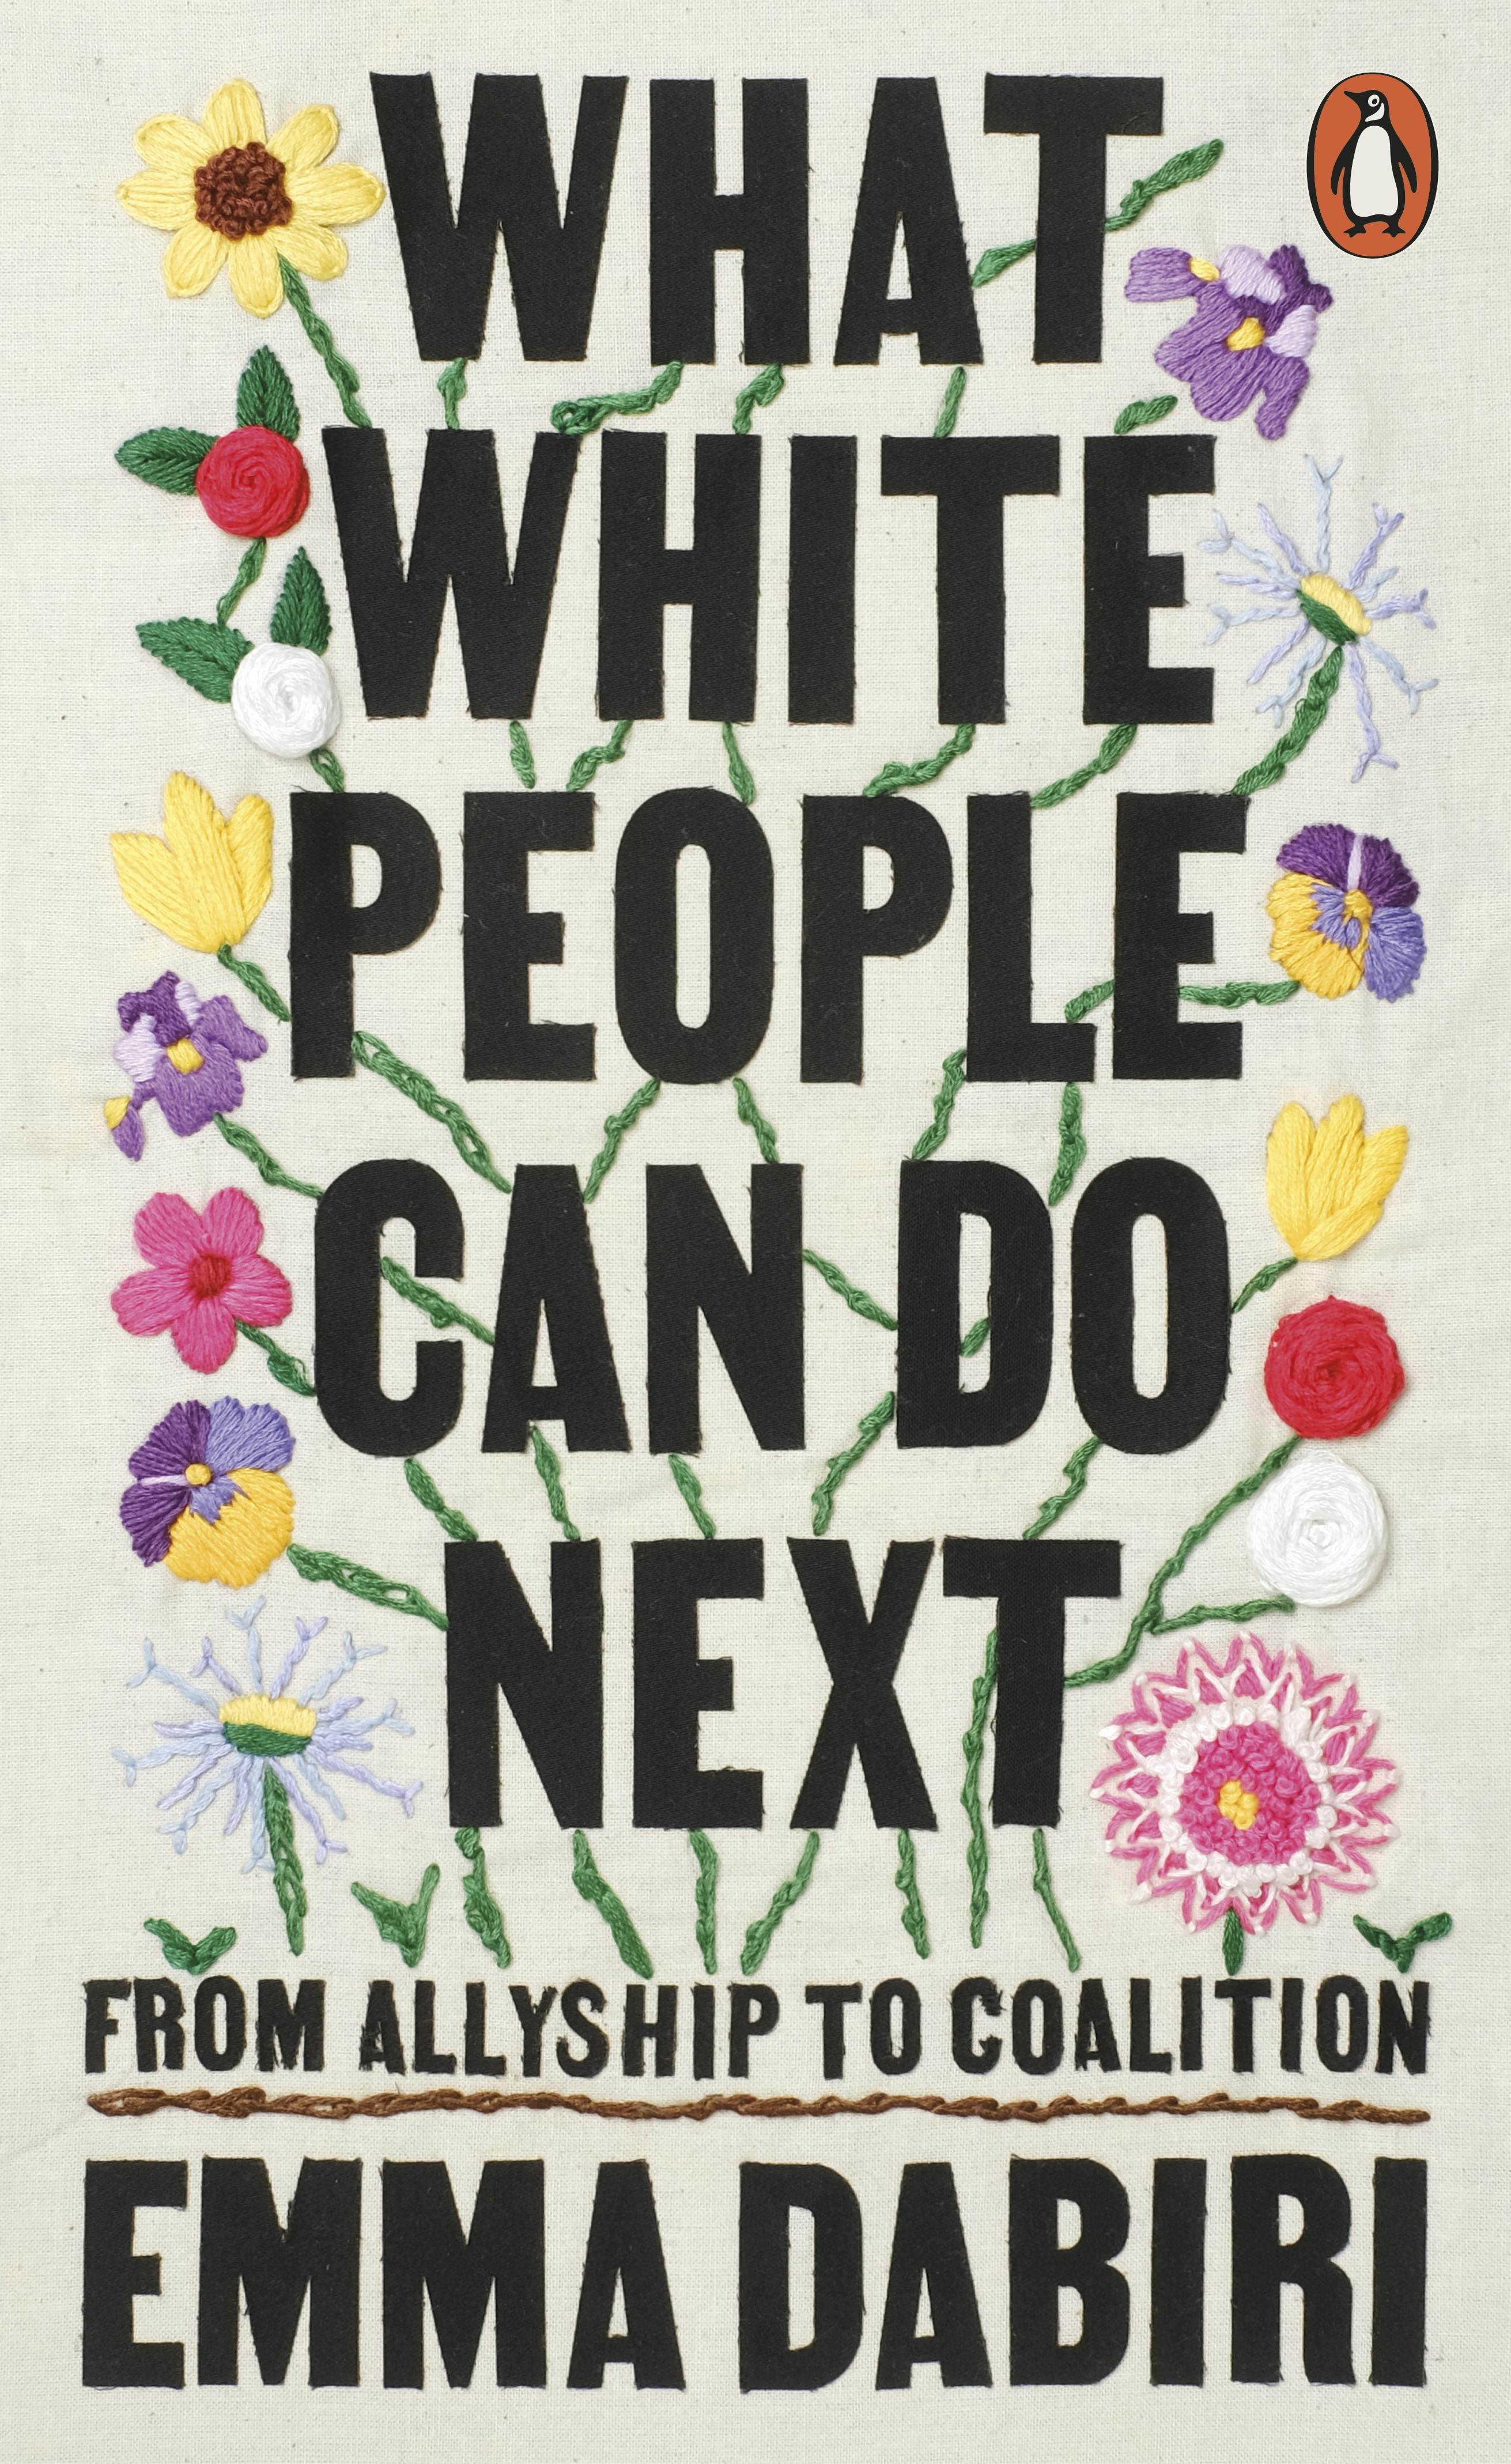 The media cover for “What White People Can Do Next” by Emma Dabiri